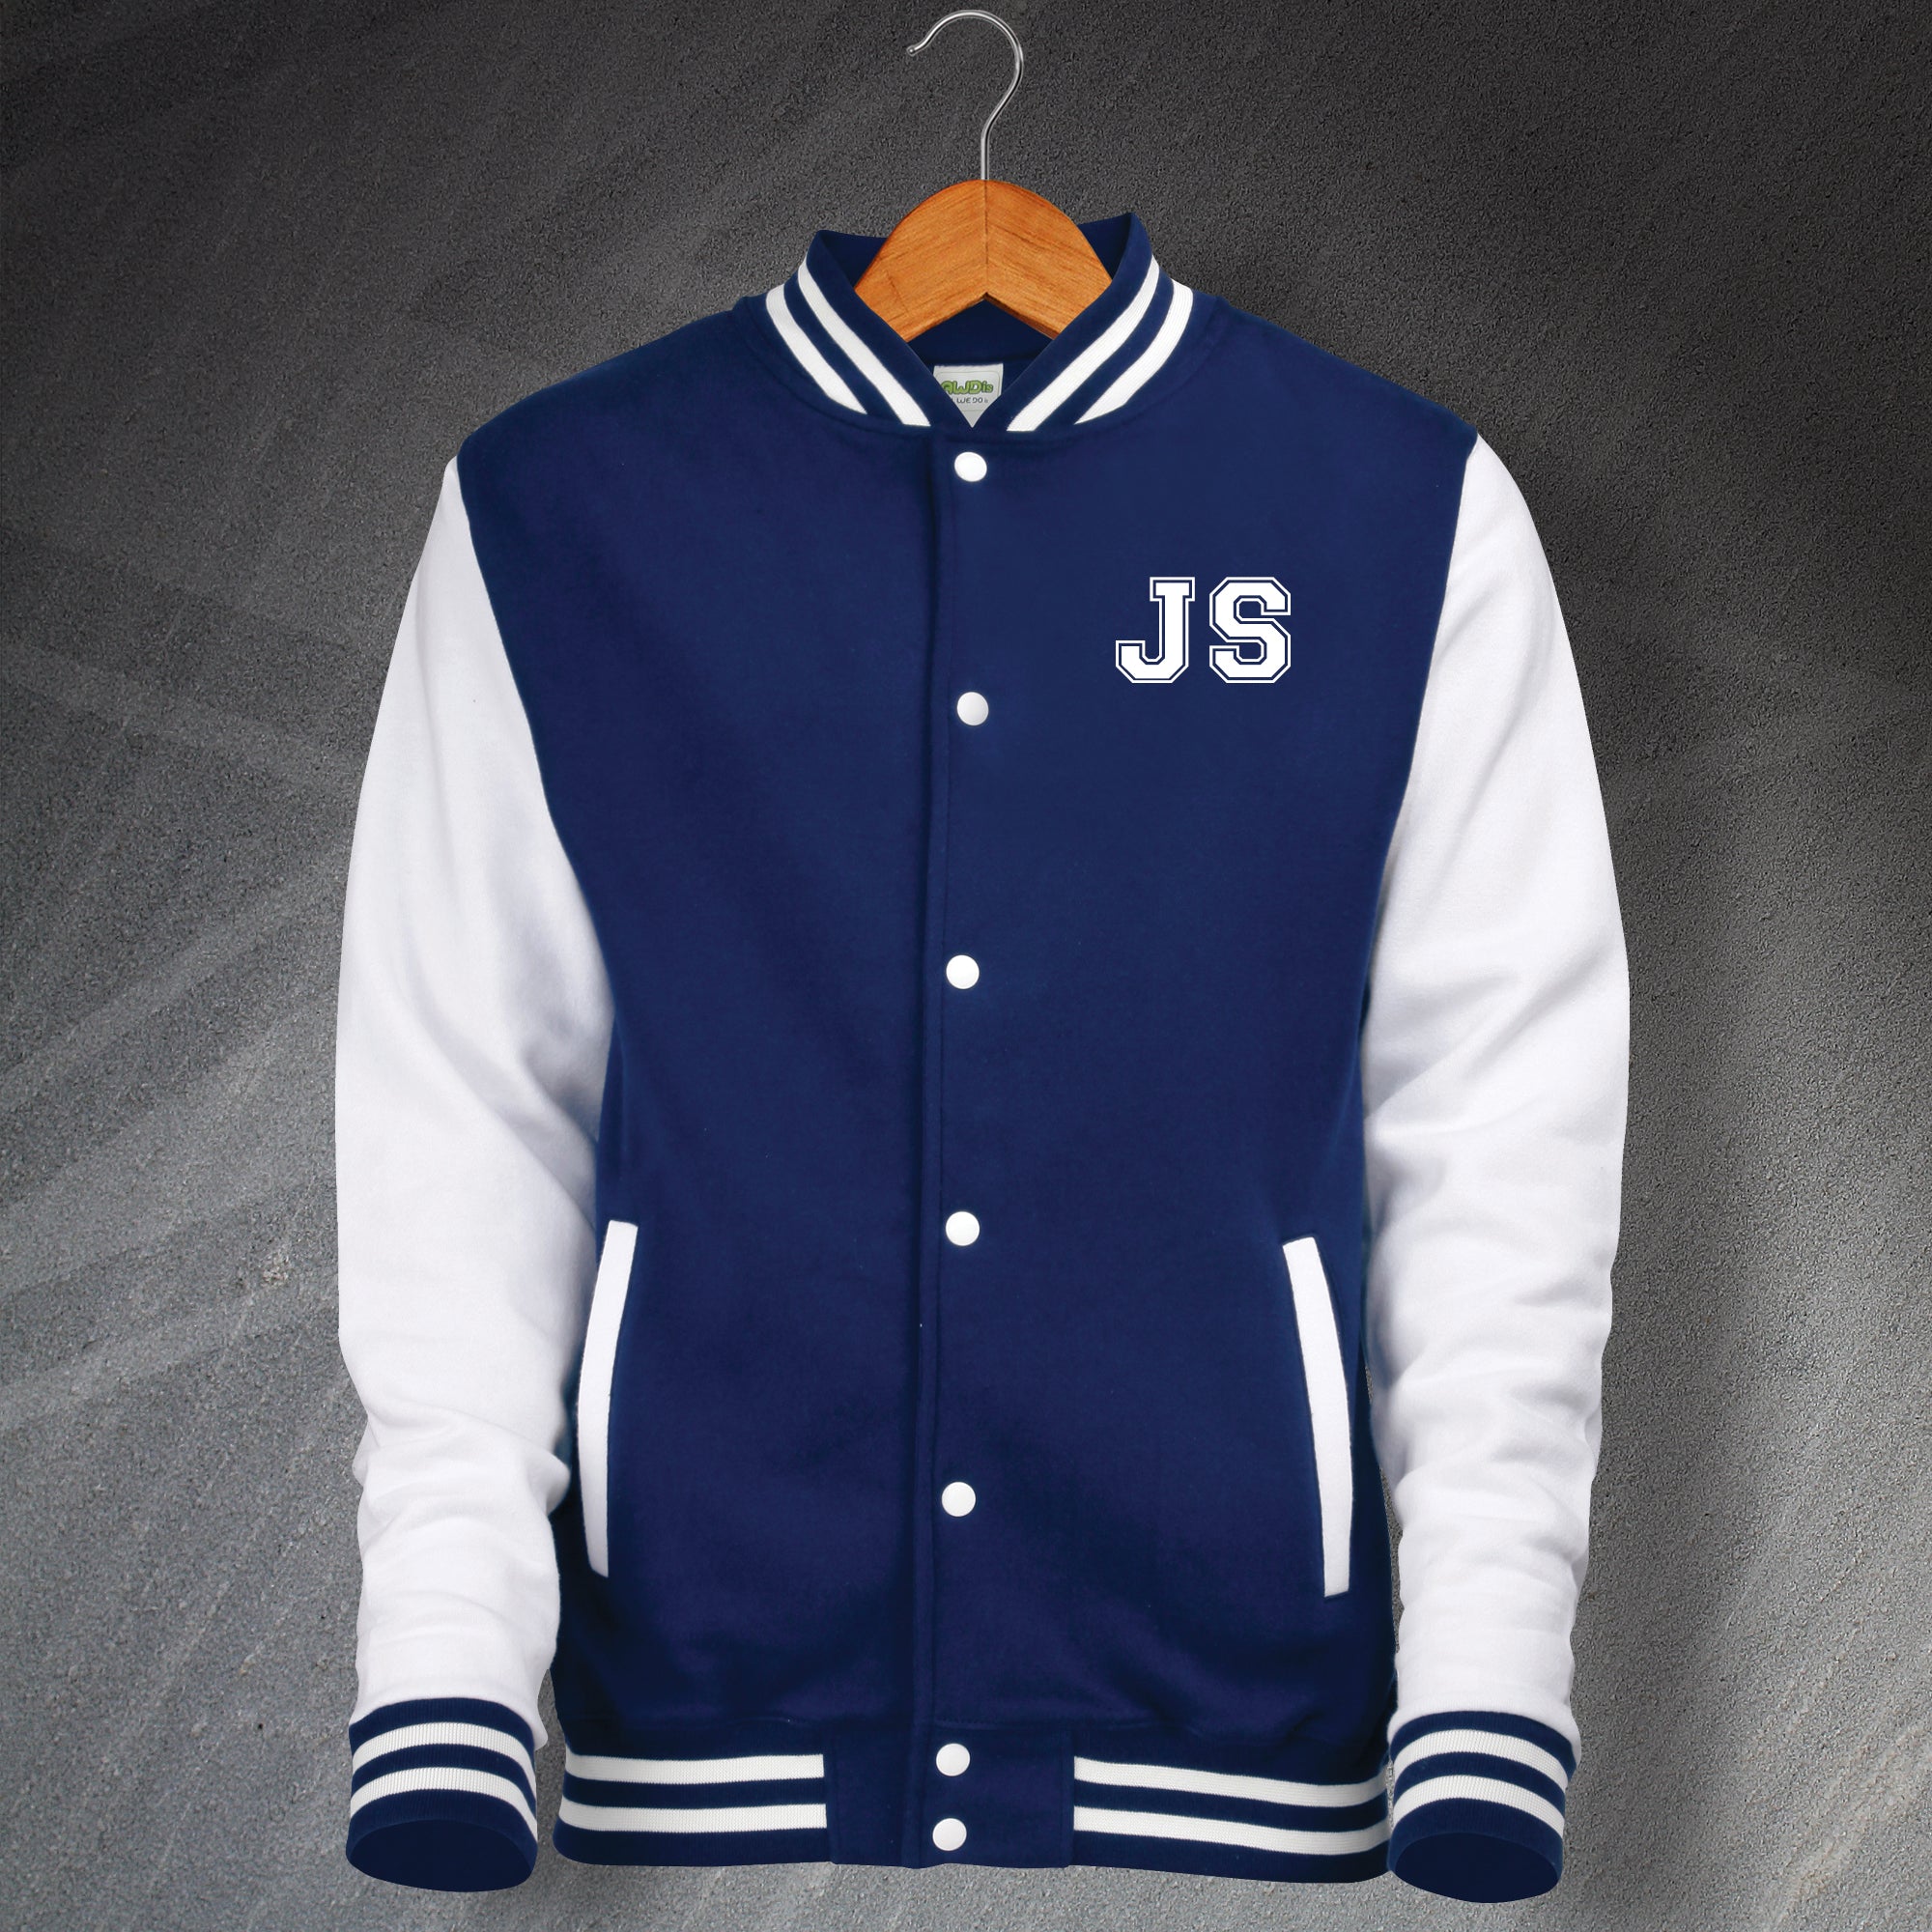 JS Initials Varsity Jacket | Embroidered Jackets with Initials ...